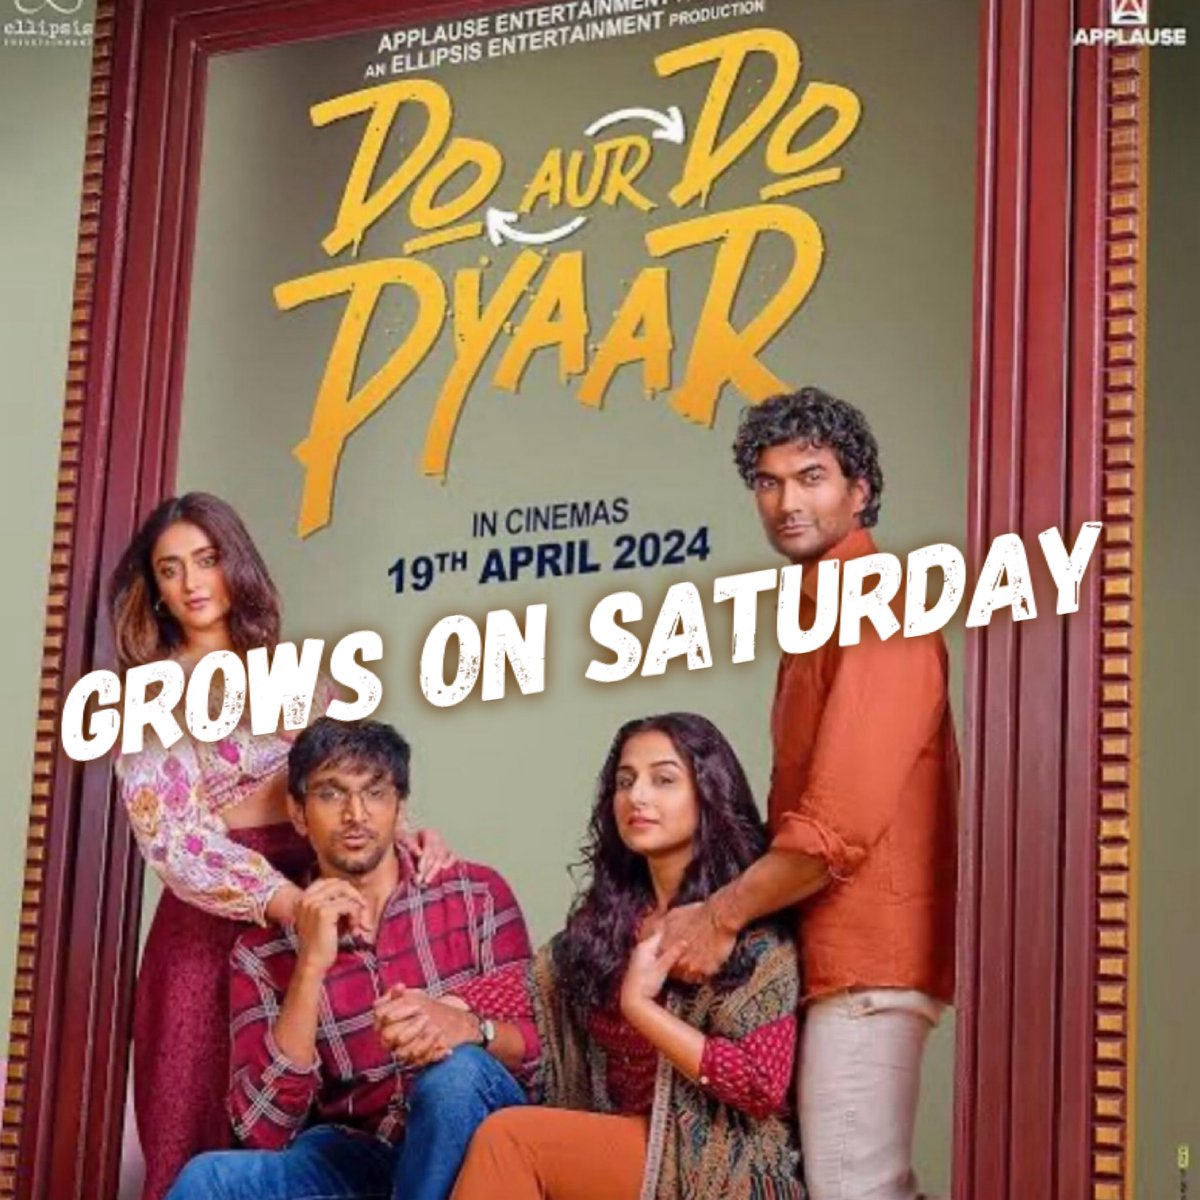 #DoAurDoPyaar grows around 60% on Saturday. The film is being patronised by the target audiences and today will turn out to be even better.

Friday - 80 lakhs
Saturday - 1.28 crore

Total - 2.08 crore